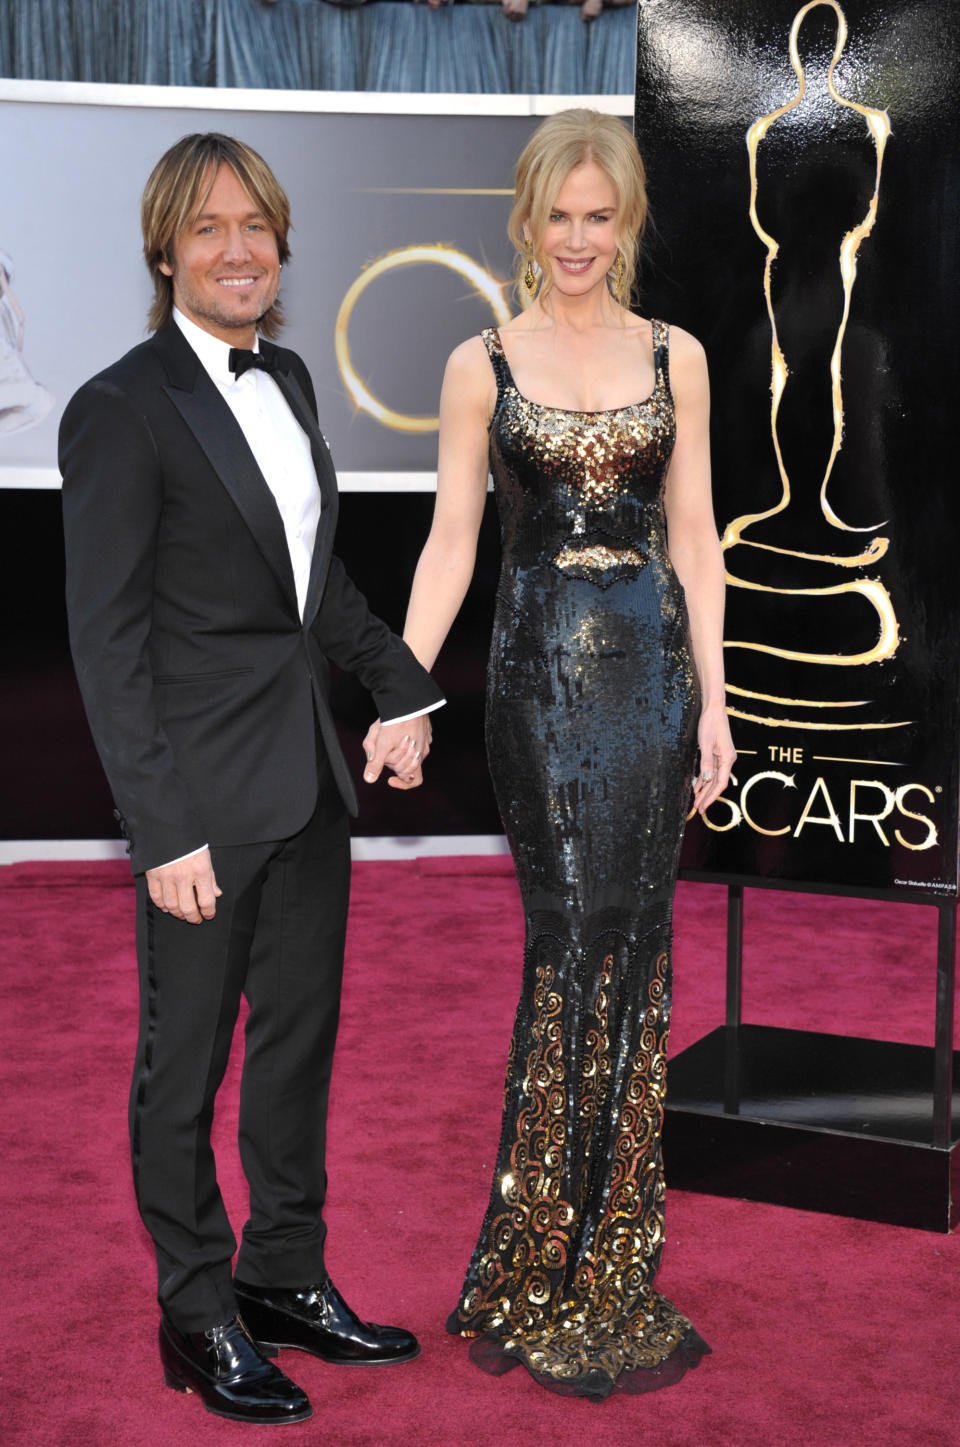 FILE - This Feb. 24, 2013 file photo shows musician Keith Urban, left, and his wife actress Nicole Kidman at the Oscars at the Dolby Theatre in Los Angeles. urban is a judge on the singing competition series, "American Idol," airing Wednesdays and Thursdays on Fox. (Photo by John Shearer/Invision/AP, file)